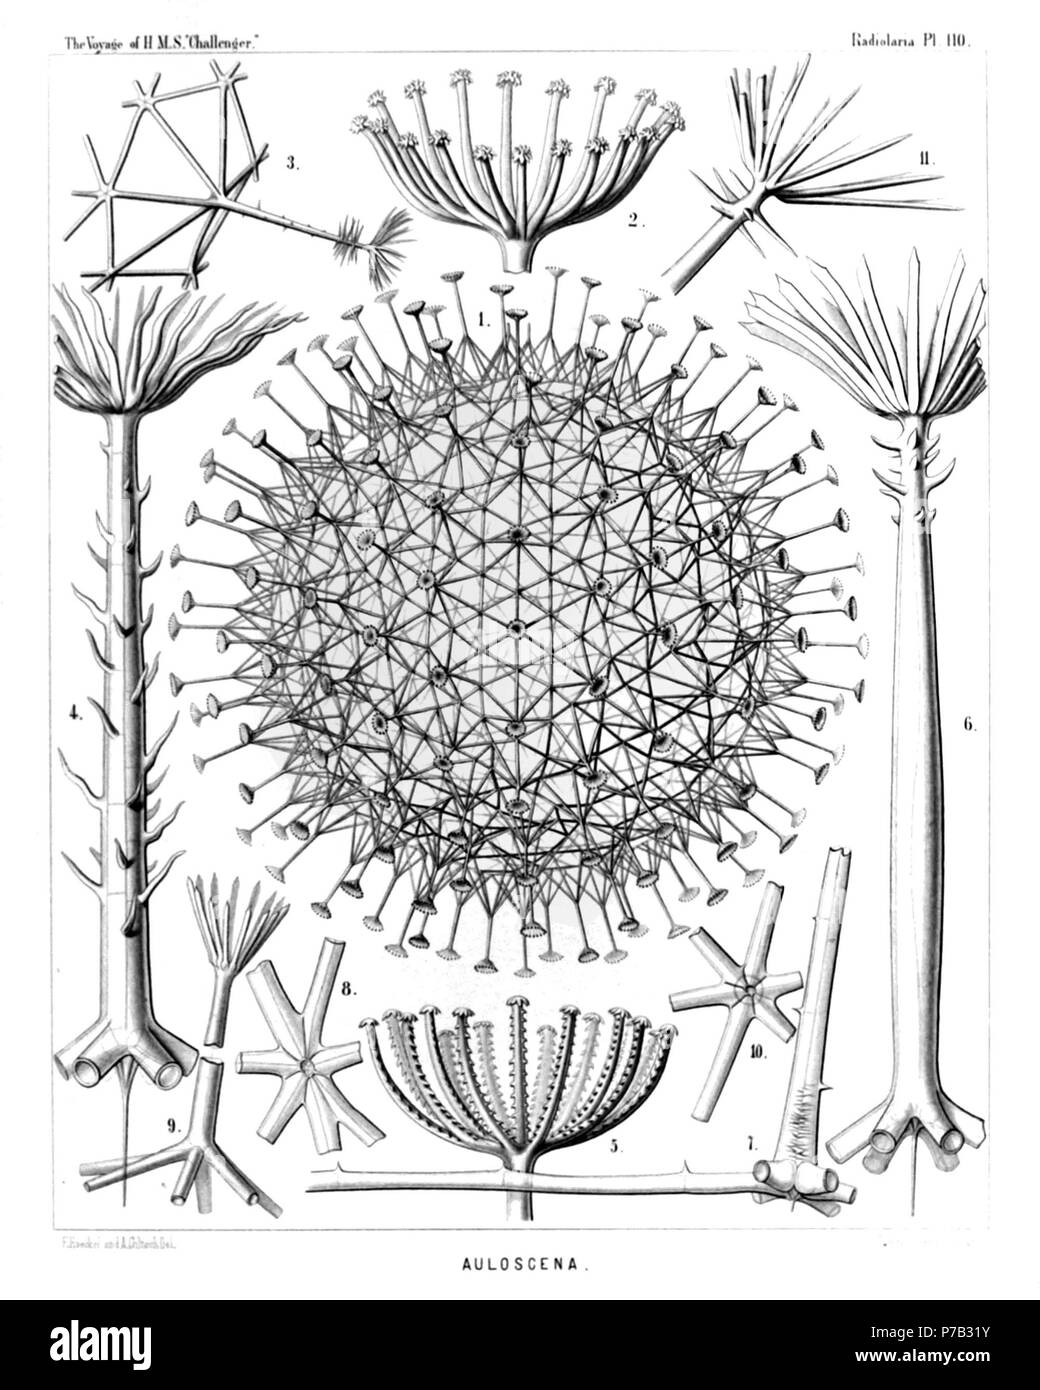 English: Illustration from Report on the Radiolaria collected by H.M.S. Challenger during the years 1873-1876. Part III. Original description follows:  Plate 110. Aulosphærida.  Diam.  Fig. 1. Auloscena mirabilis, n. sp., × 50  The complete shell, representing a regular latticed sphere, which is composed of equal hexagonal pyramids; the top of each pyramid bears a radial tube with a terminal corona.  Fig. 2. Auloscena mirabilis, n. sp., × 600  Terminal corona of a single radial tube.  Fig. 3. Auloscena penicillus, n. sp., × 200  A single tent-shaped elevation or six-sided pyramid, bearing on t Stock Photo